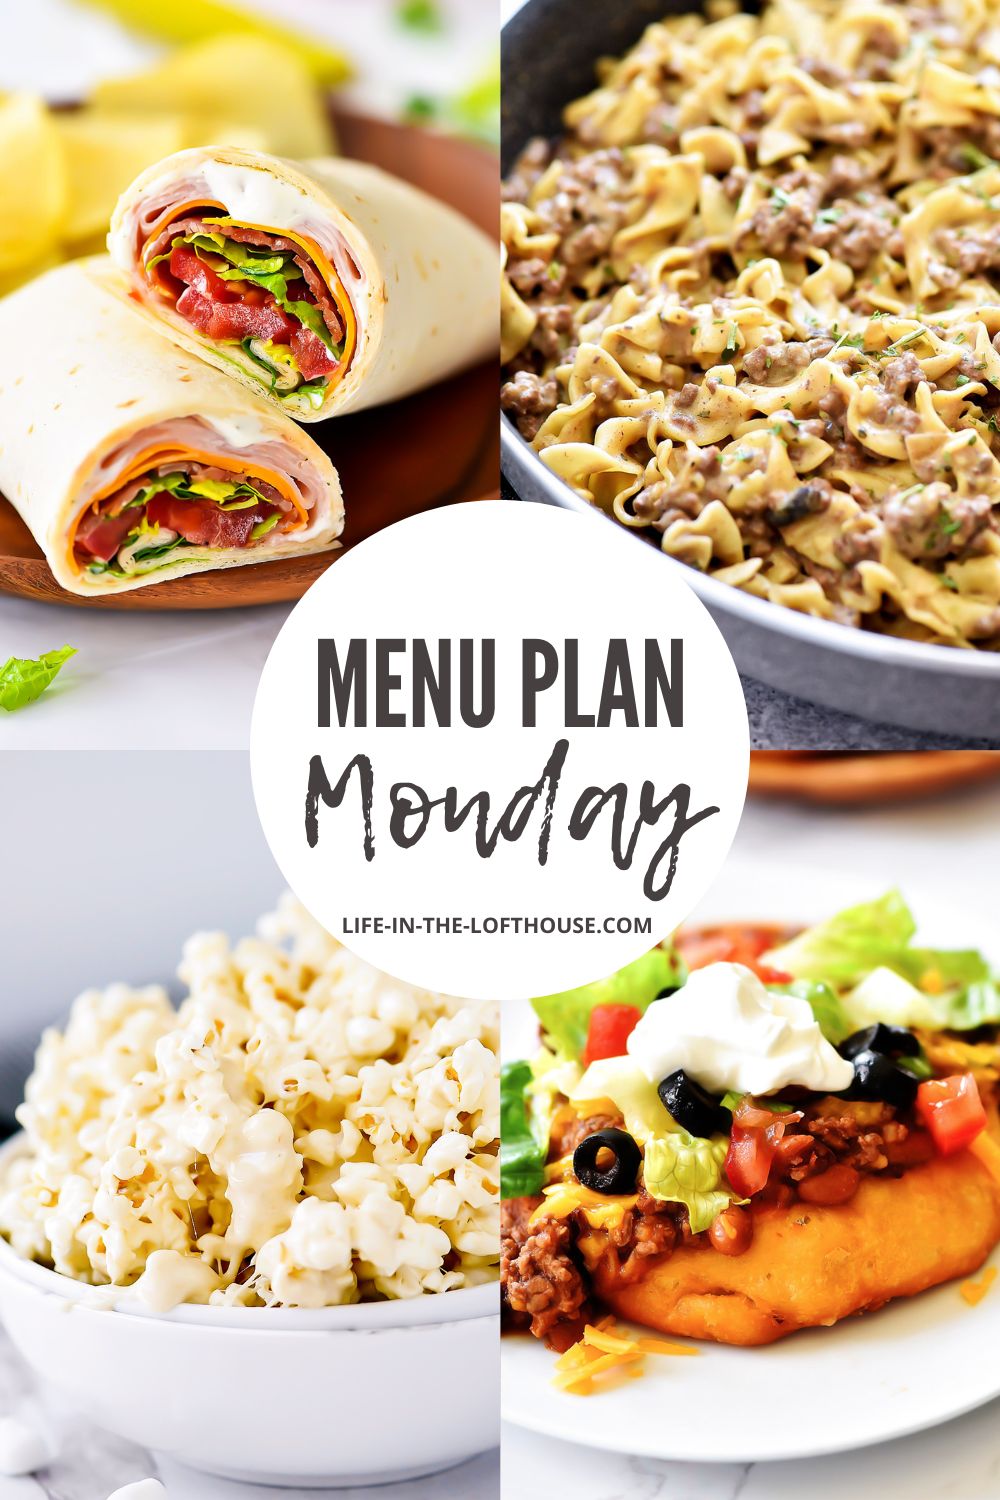 Menu Plan Monday is a list of meal ideas. 